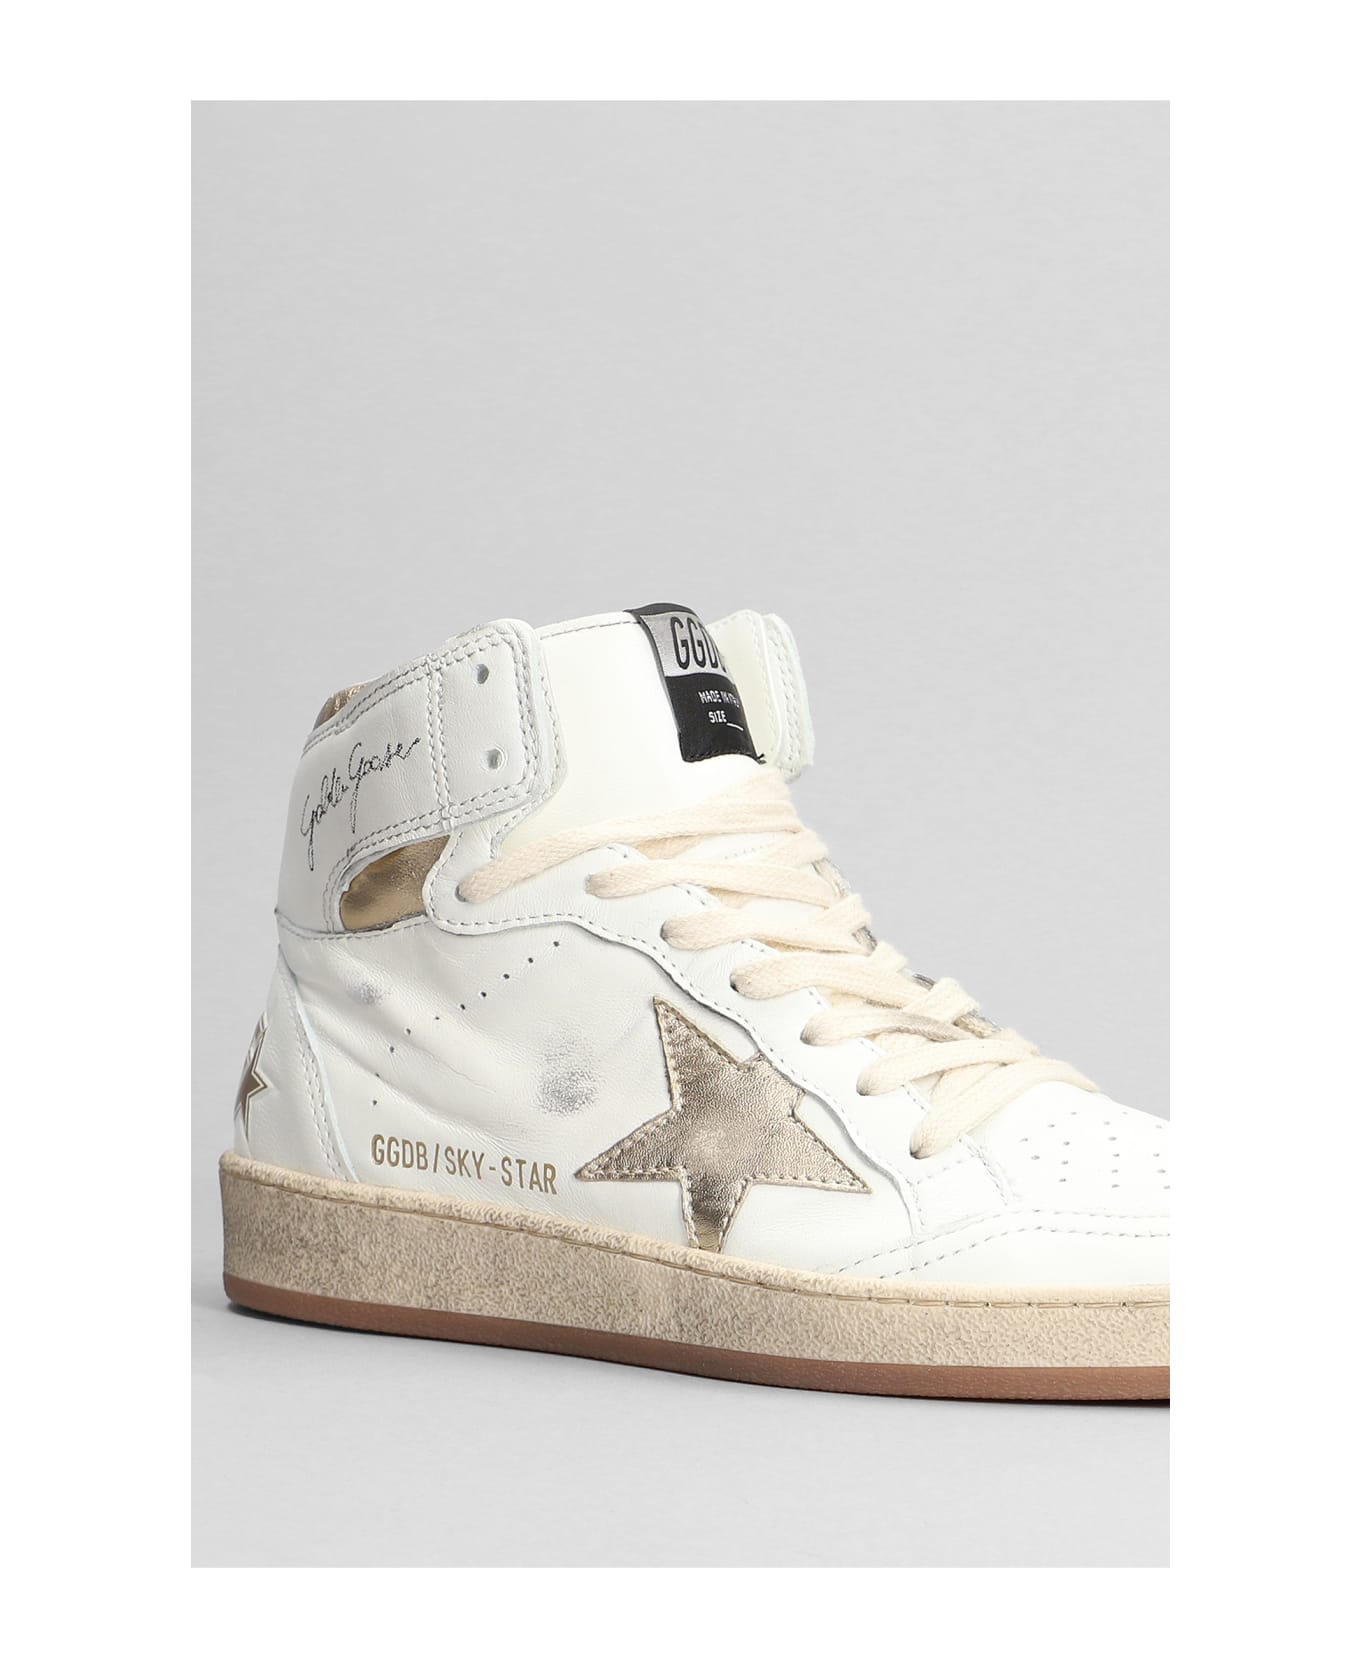 Golden Goose Sky Star Sneakers In White Leather - white